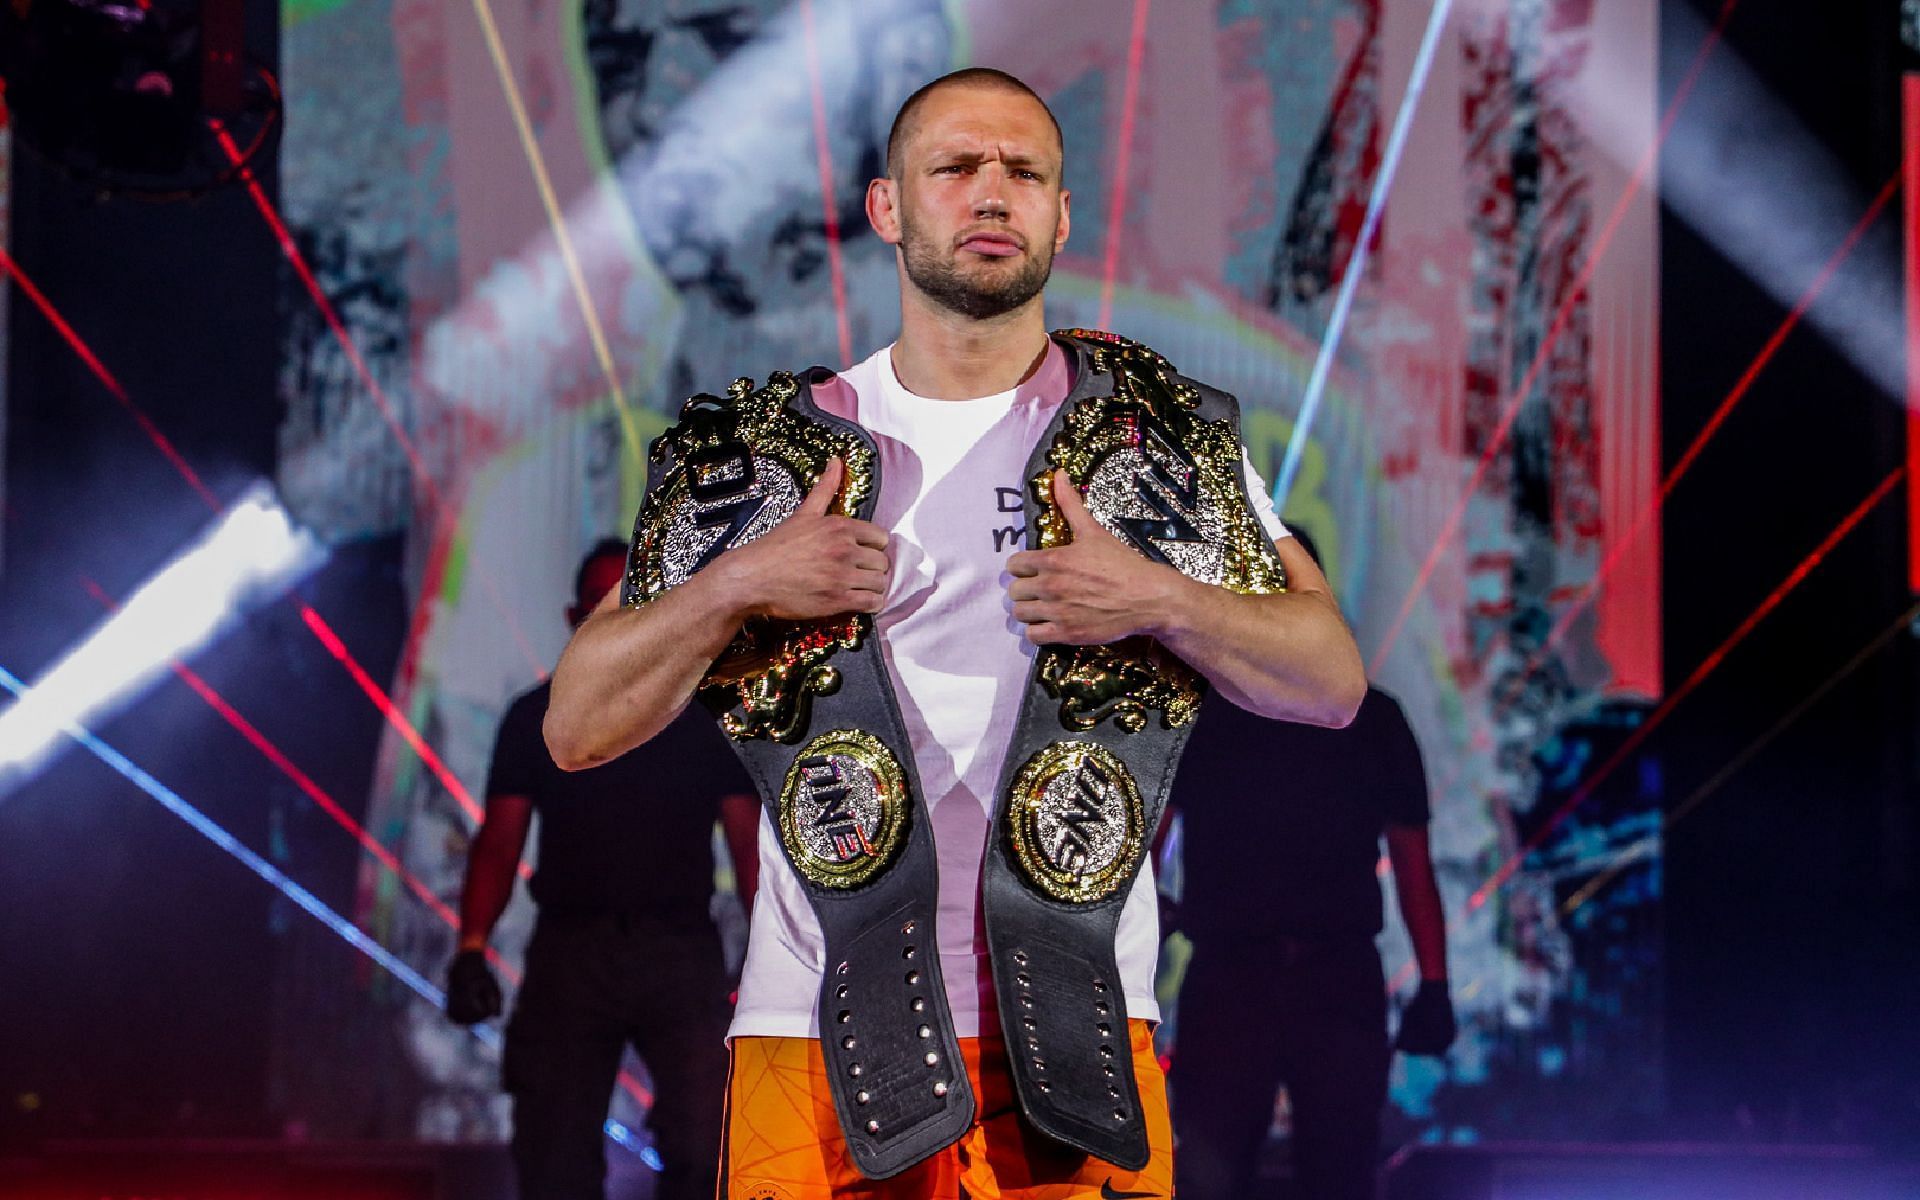 Reinier De Ridder applauds ONE Championship in its continue push of submission grappling in its events. [Photo ONE Championship]